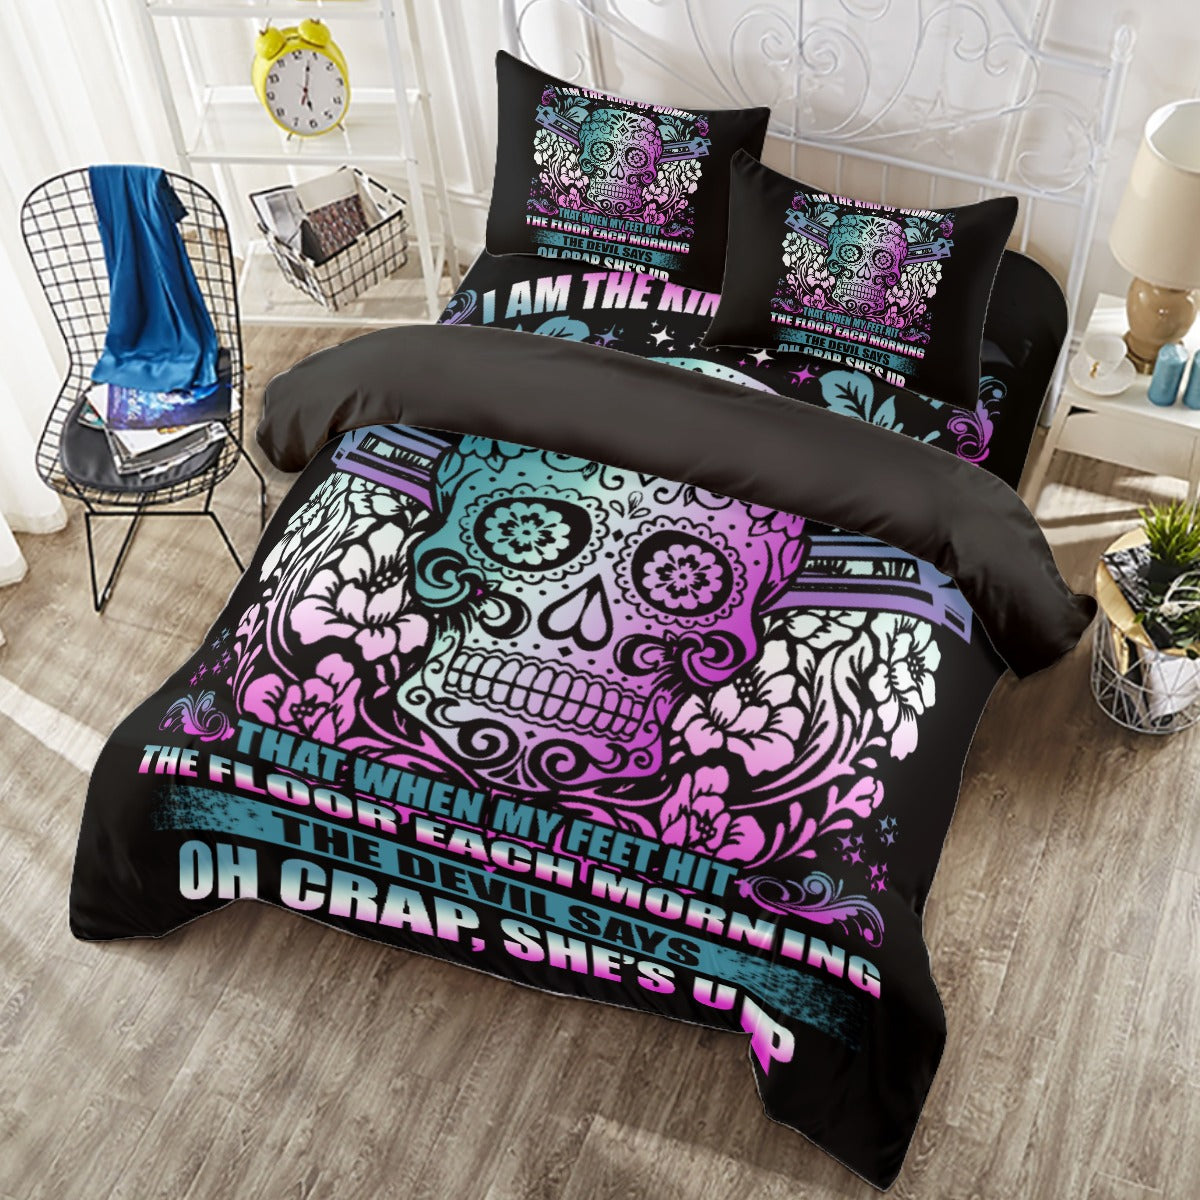 Sugar skull Four-piece Duvet Cover Set, Day of the dead bedding cover set